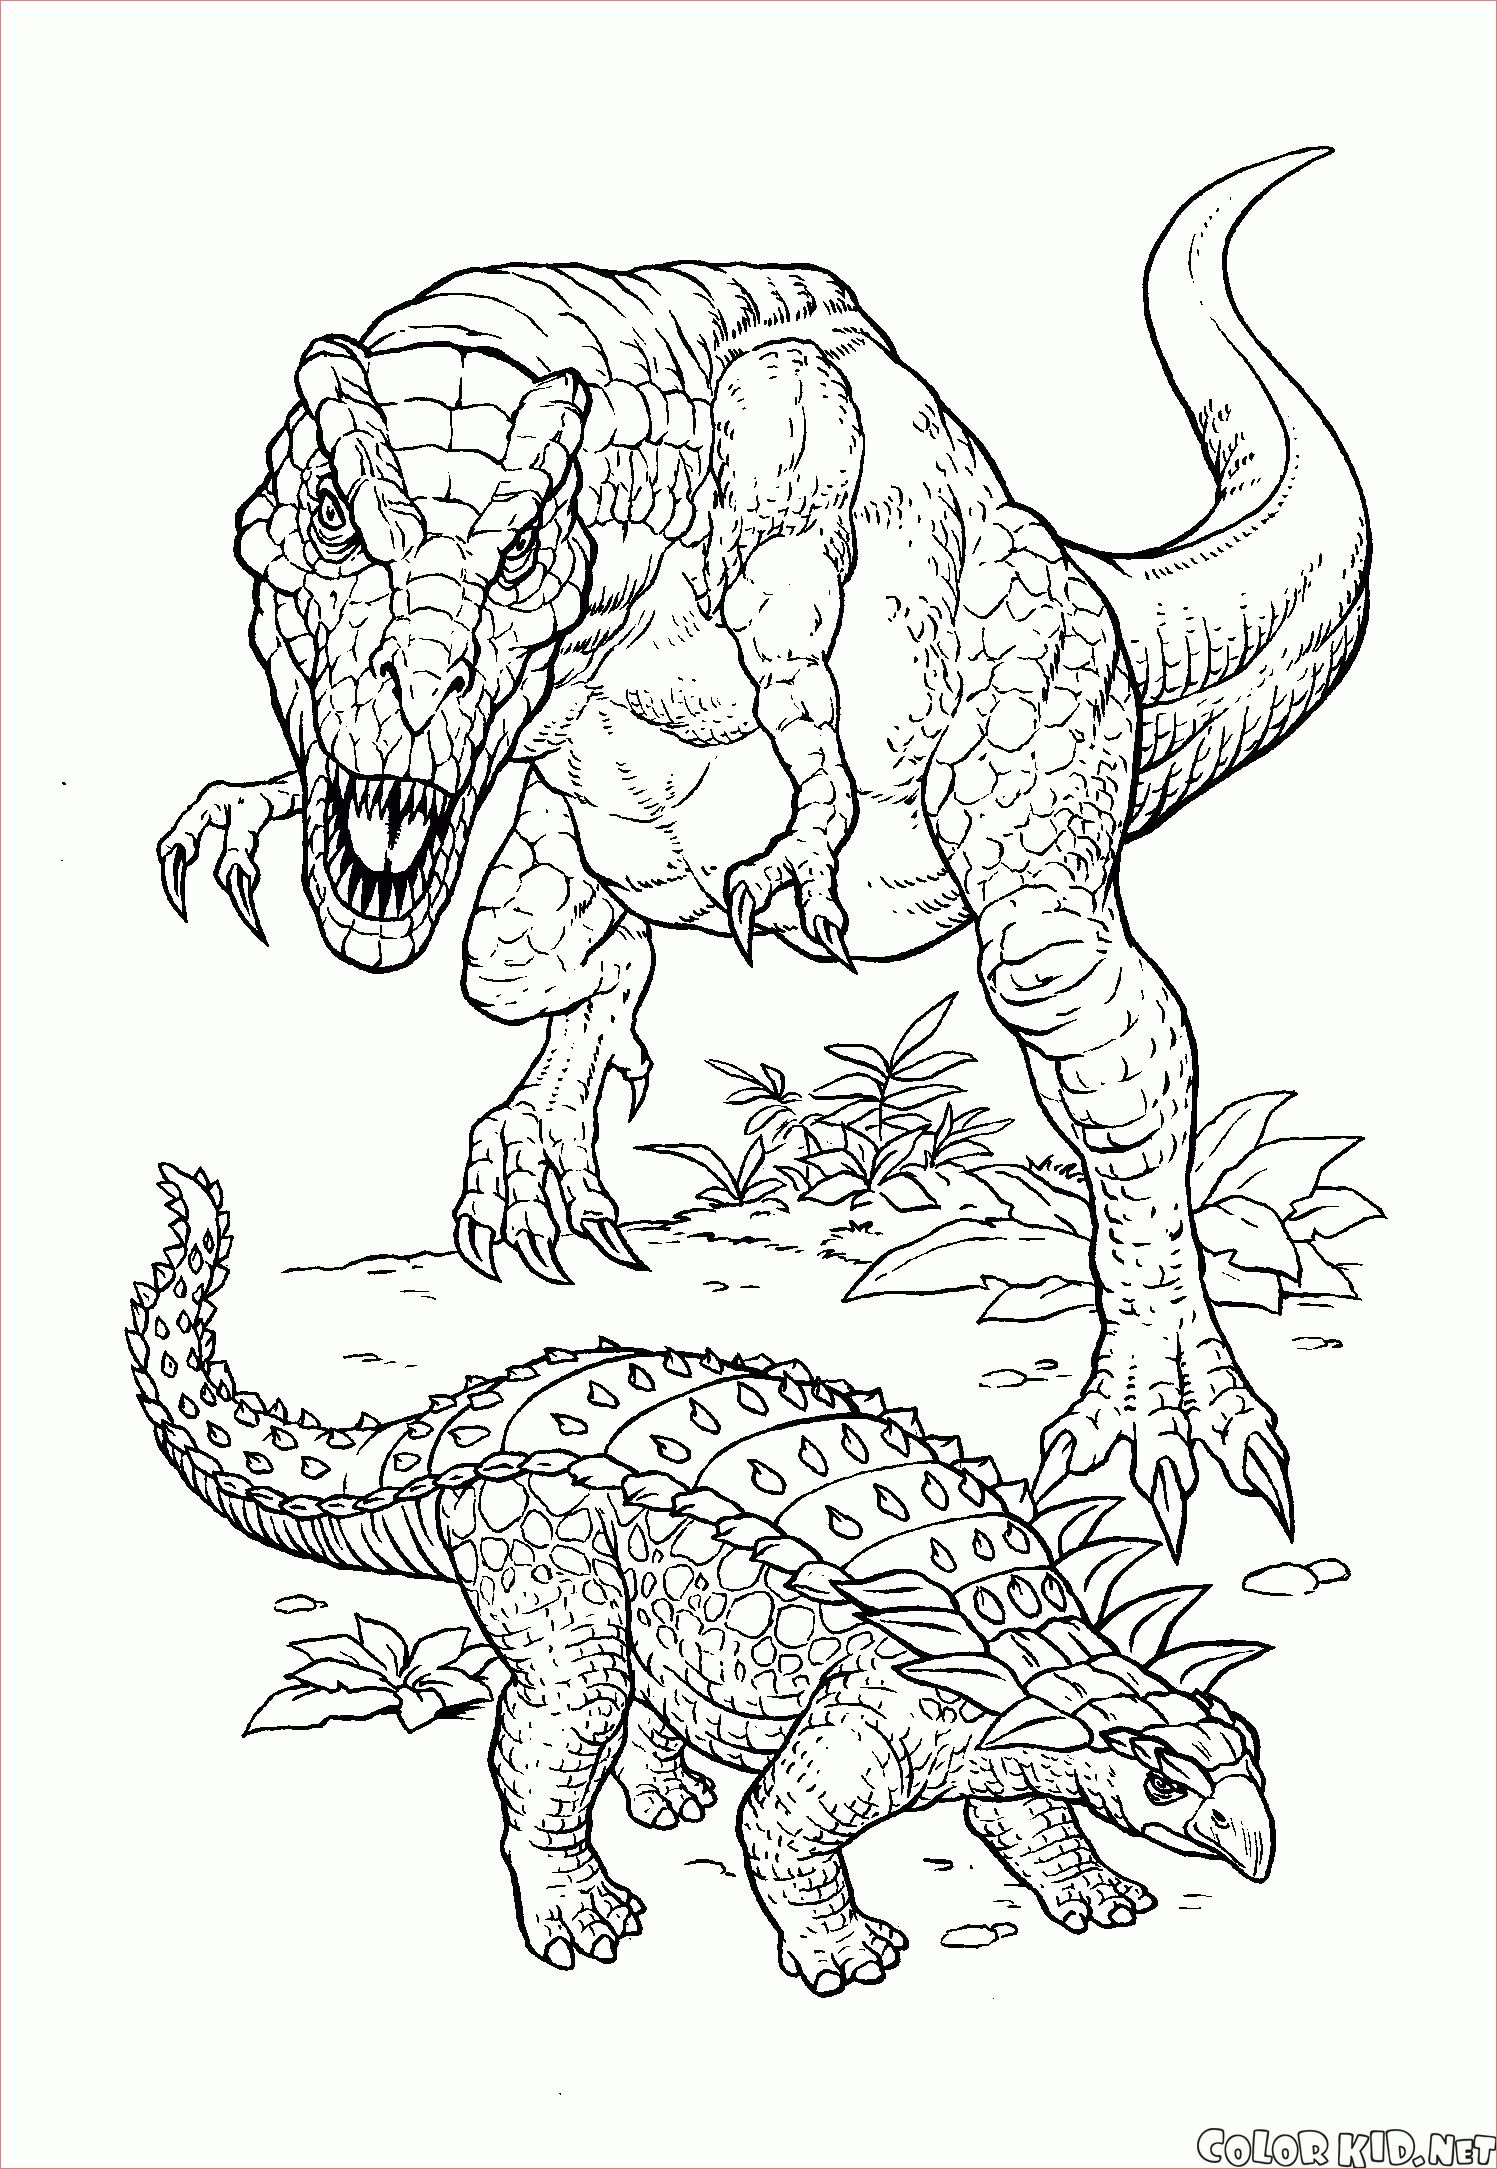 10 Paisible Tyrannosaure Coloriage Gallery